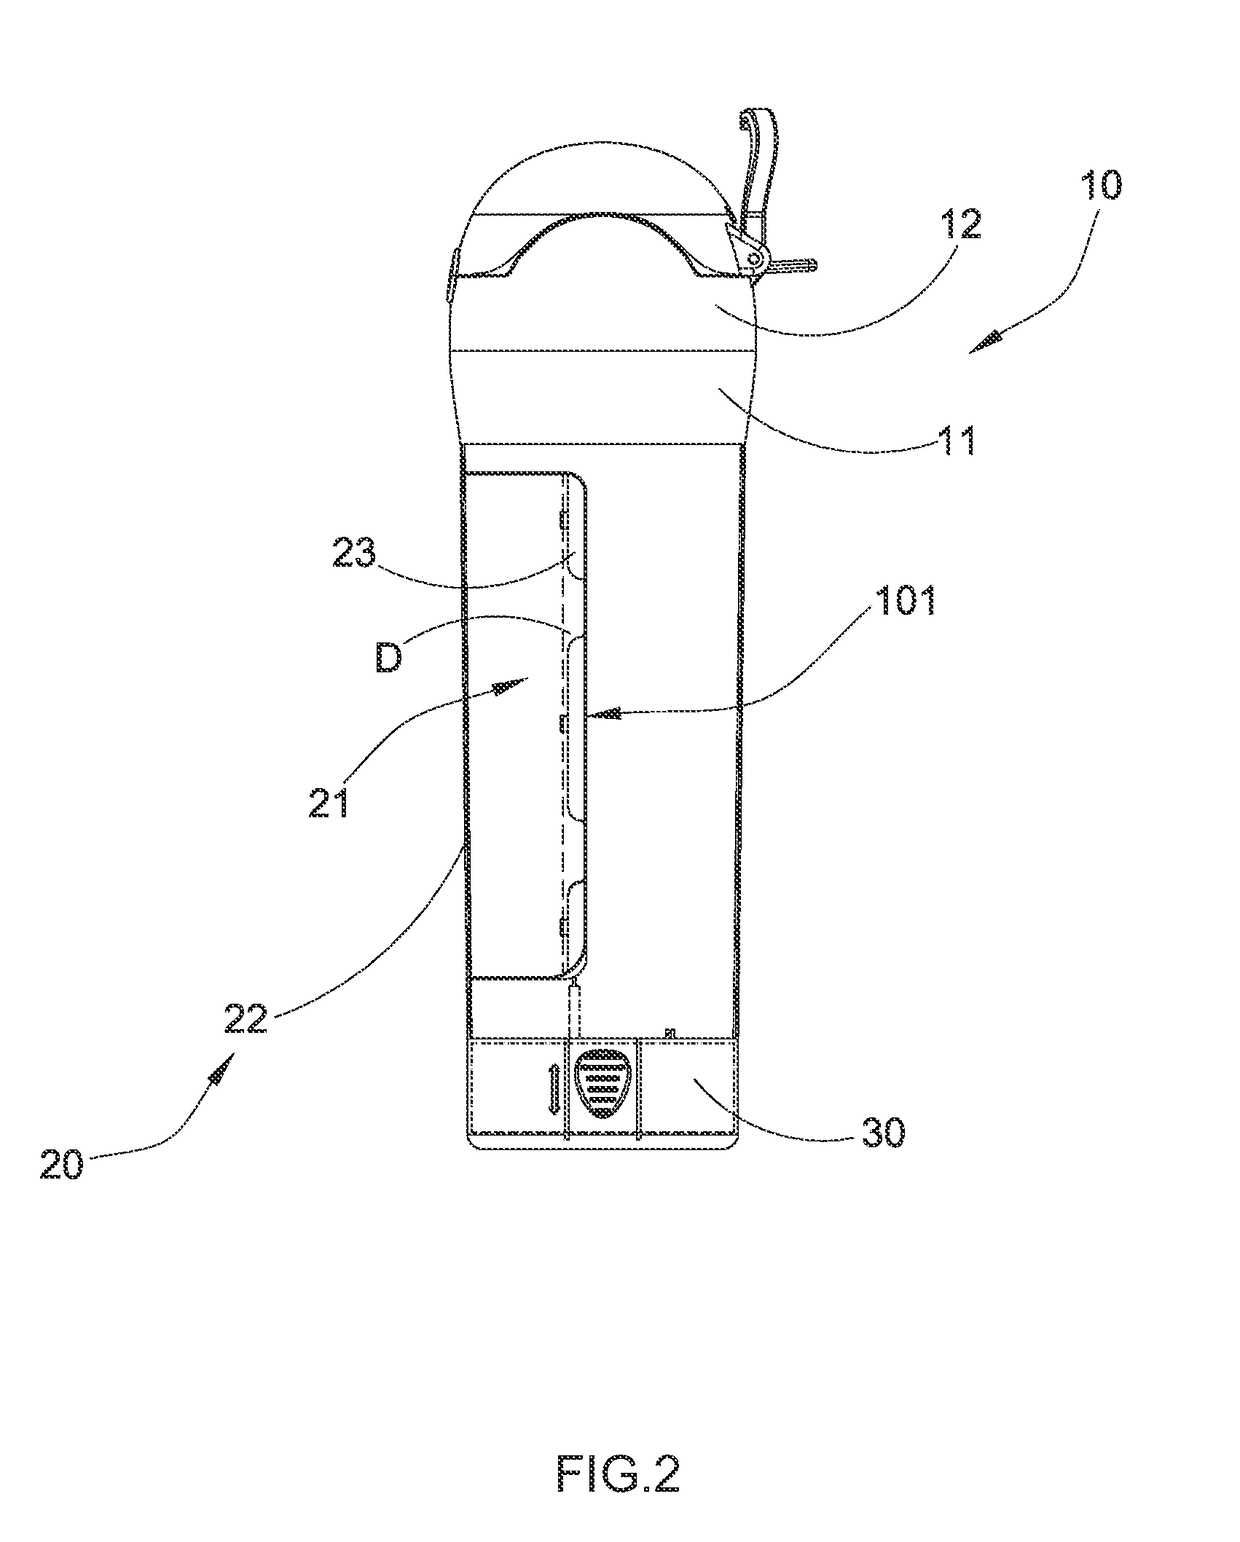 Beverage Bottle with Accessible Station for Portable Electronic Device